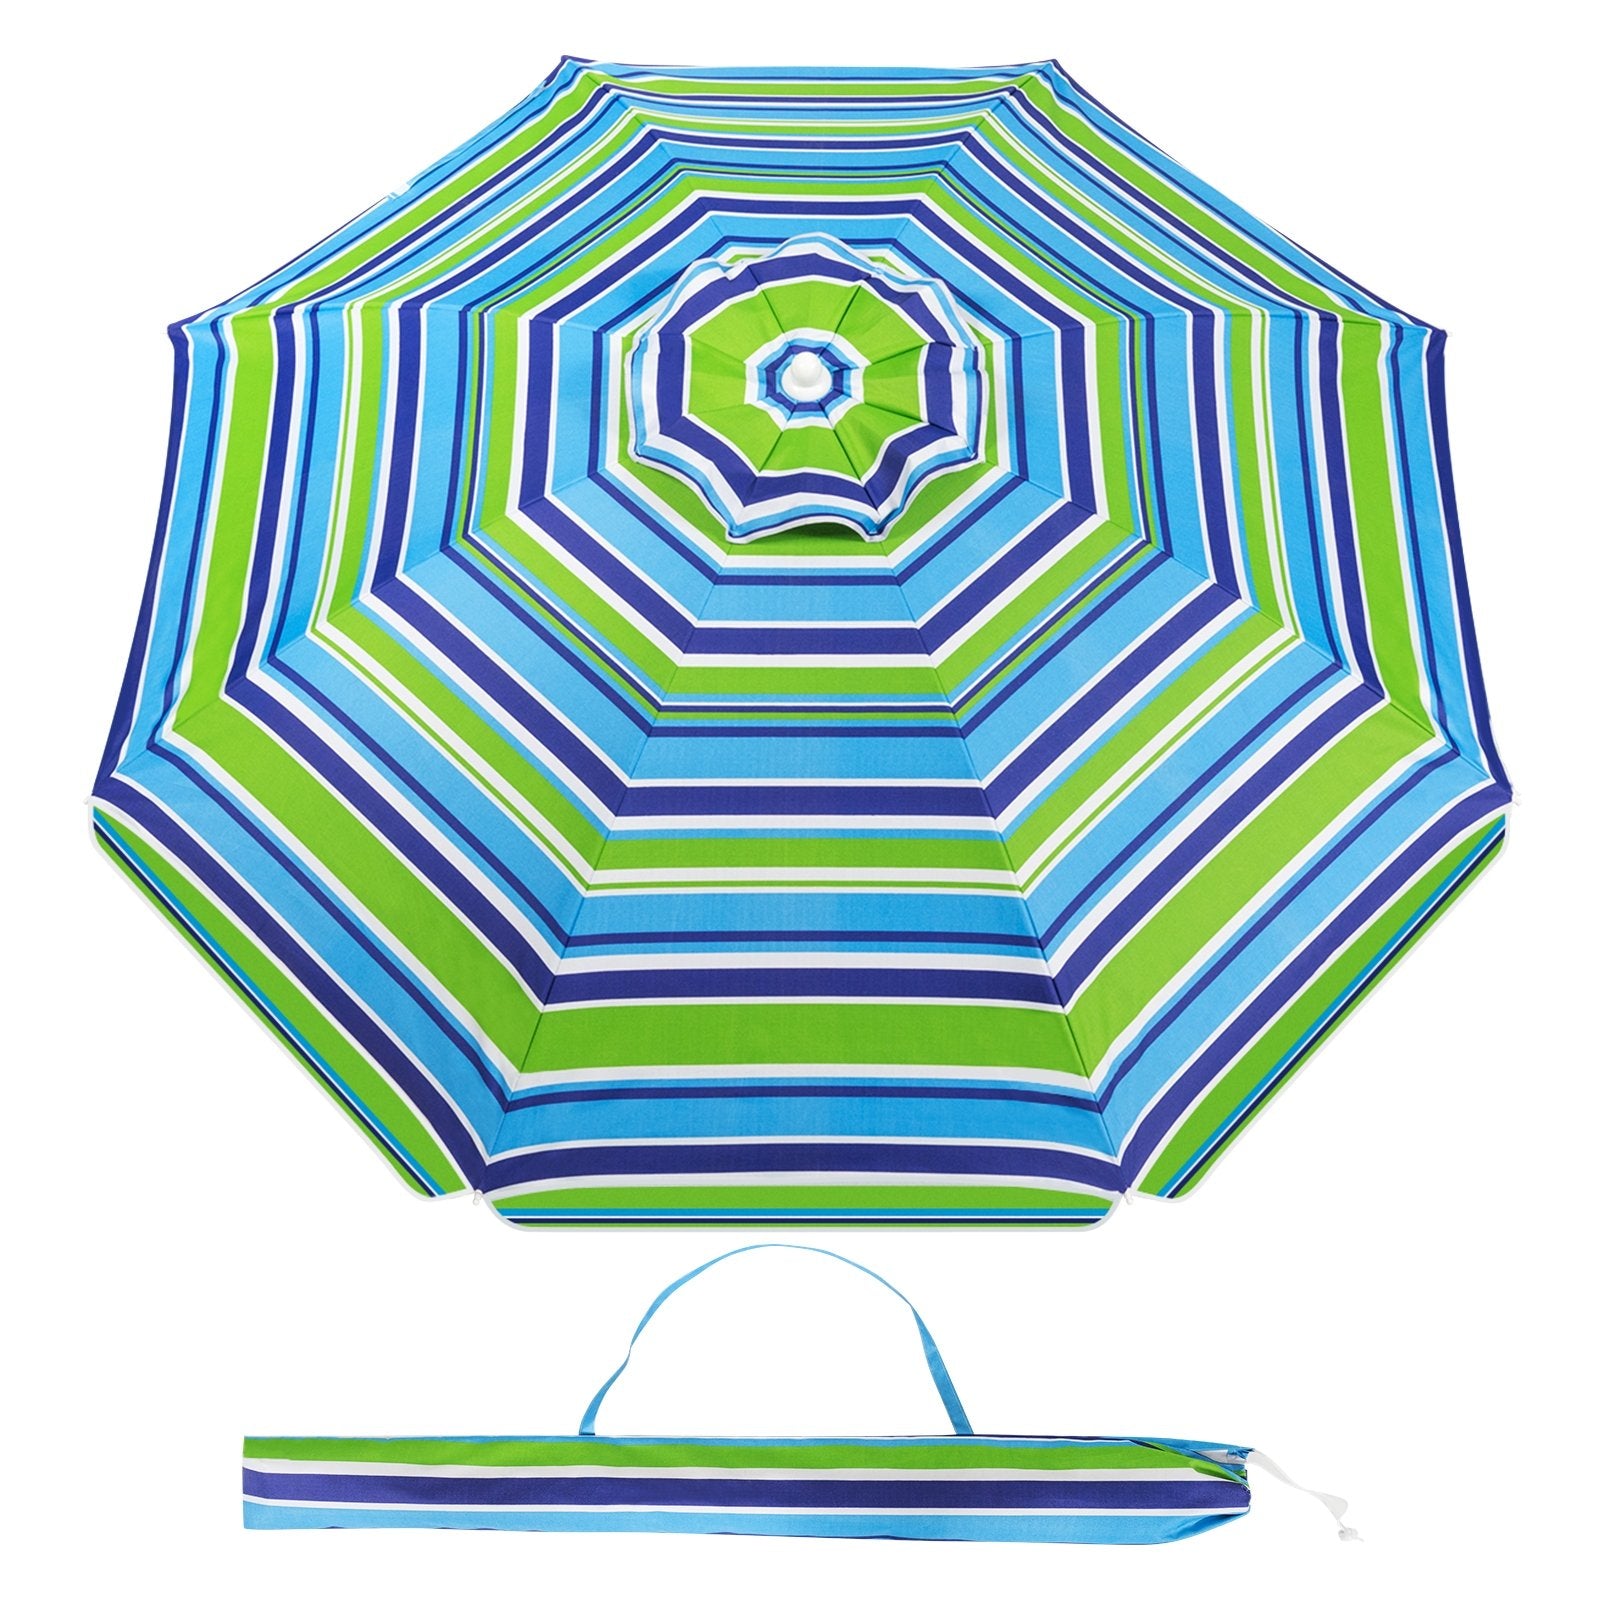 6.5 Feet Beach Umbrella with Sun Shade and Carry Bag without Weight Base, Green at Gallery Canada